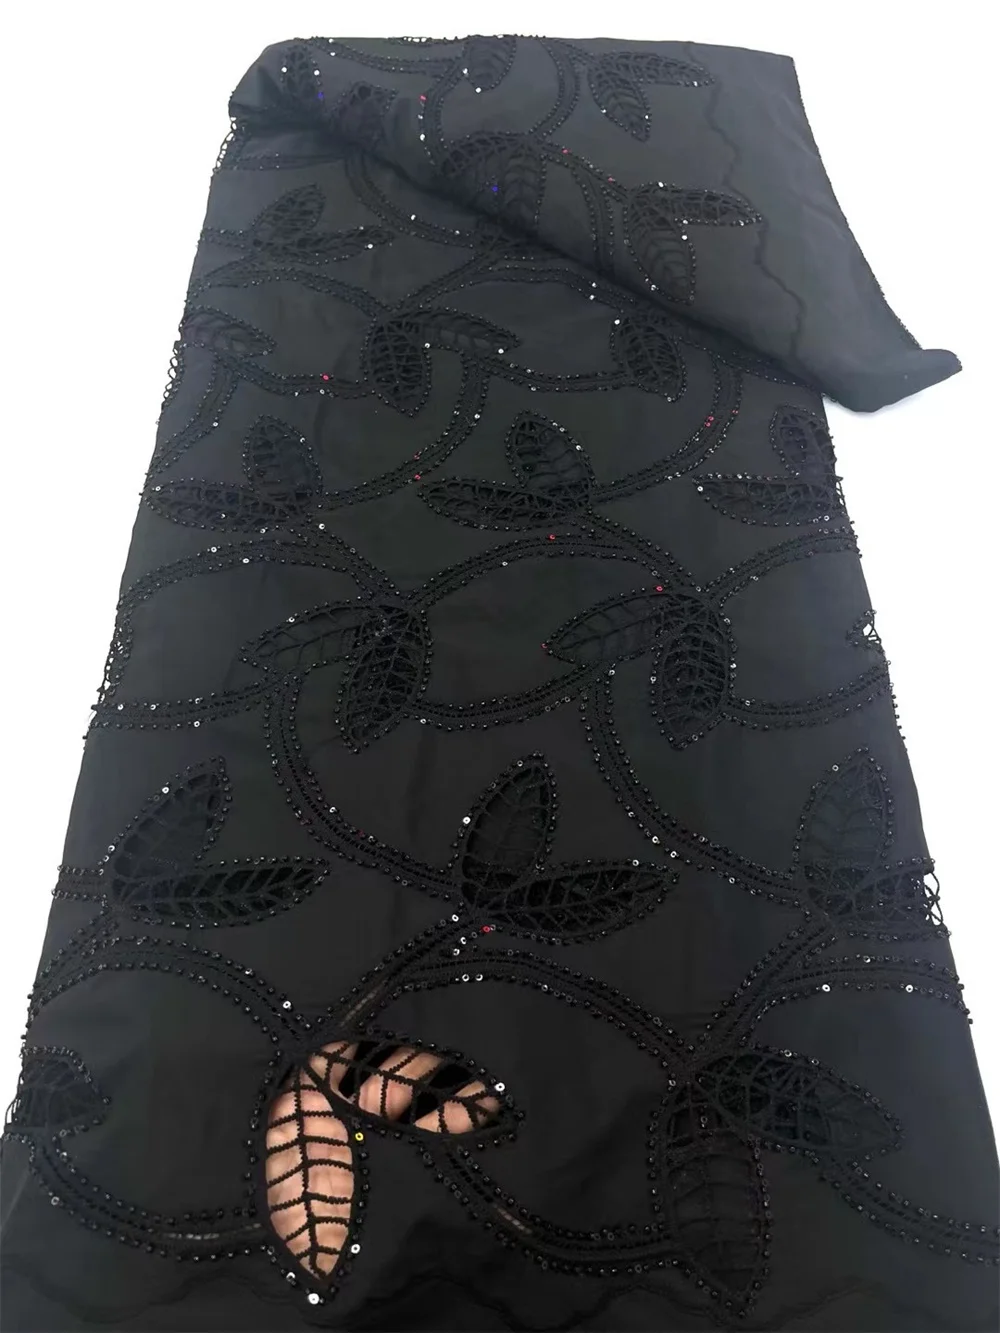 

Black African High Quality Lace Fabric 2024 French Sequins Chiffon Lace Fabric Sewing Embroidered Nigerian Lace Fabric A63-3